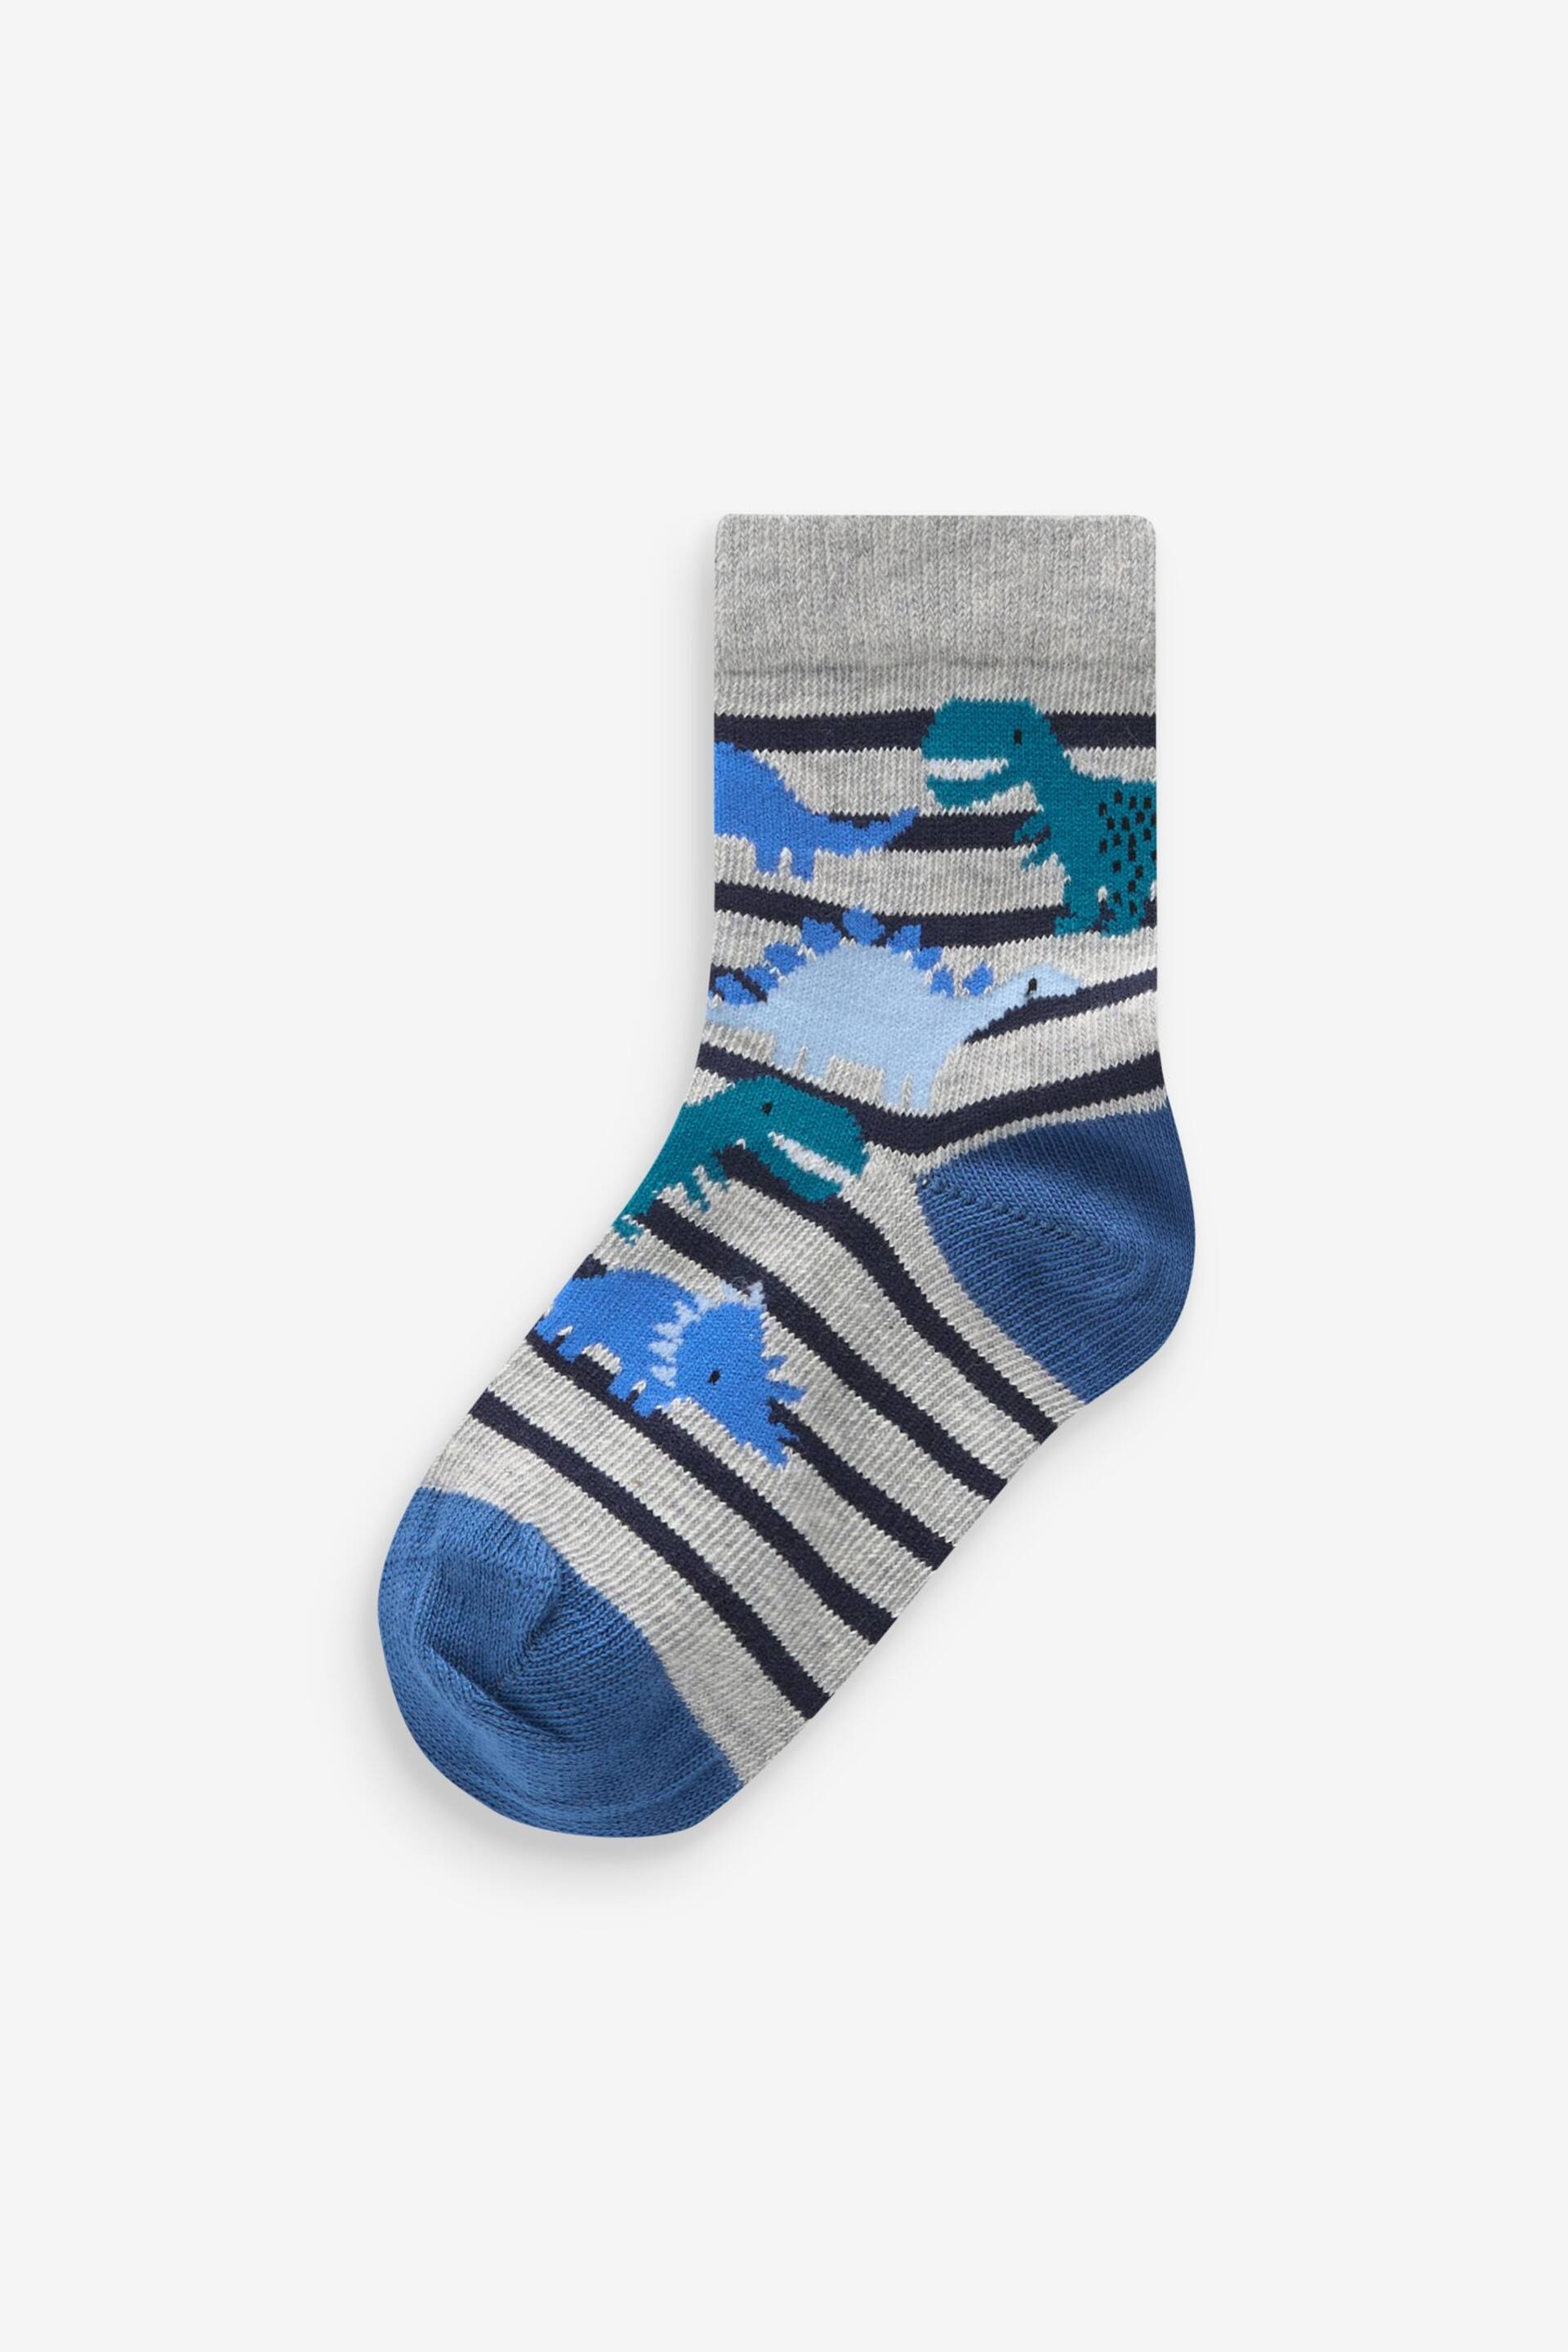 Blue Dino Cotton Rich Socks 7 Pack - Image 8 of 8